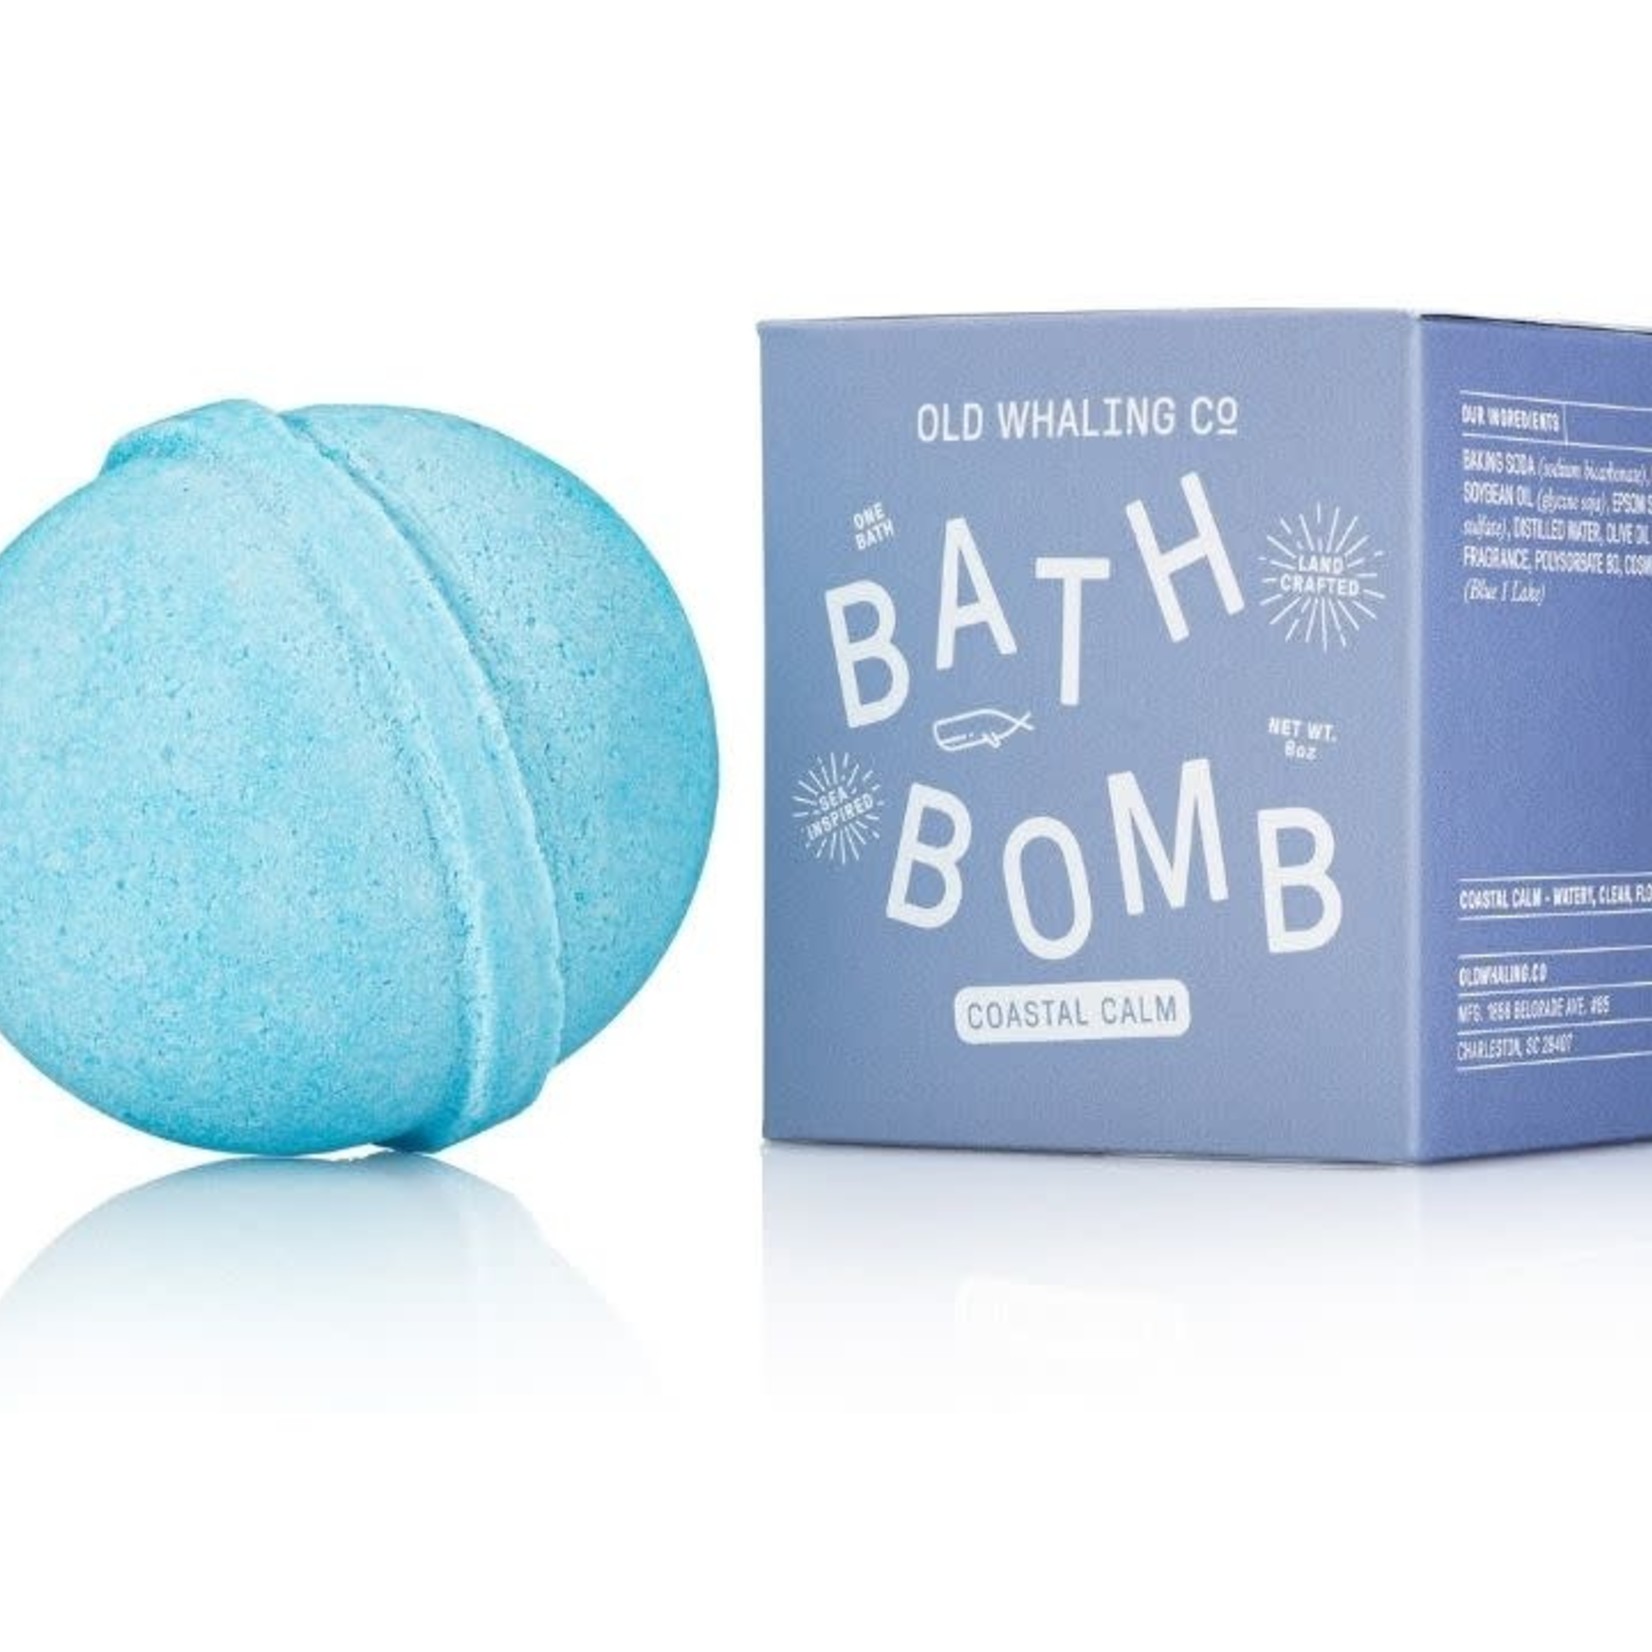 Old Whaling Company Old Whaling Company Bath Bomb